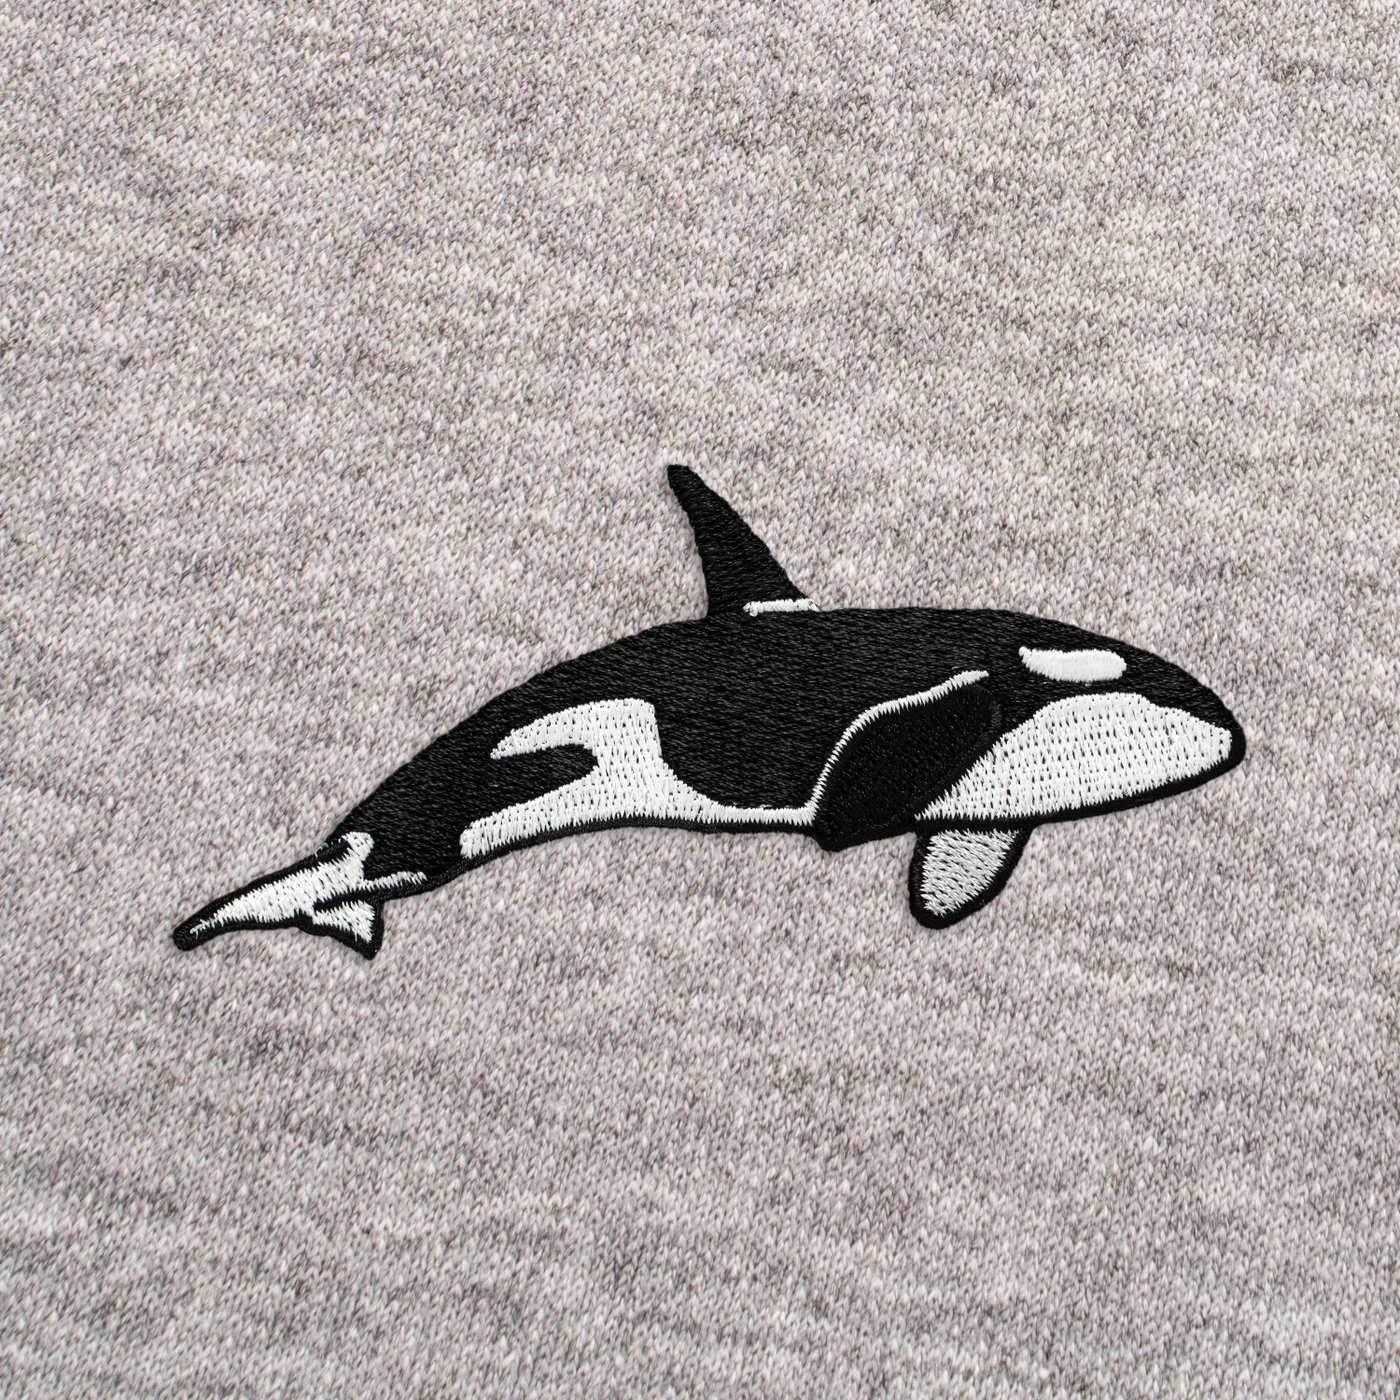 Bobby's Planet Women's Embroidered Orca Sweatshirt from Seven Seas Fish Animals Collection in Sport Grey Color#color_sport-grey